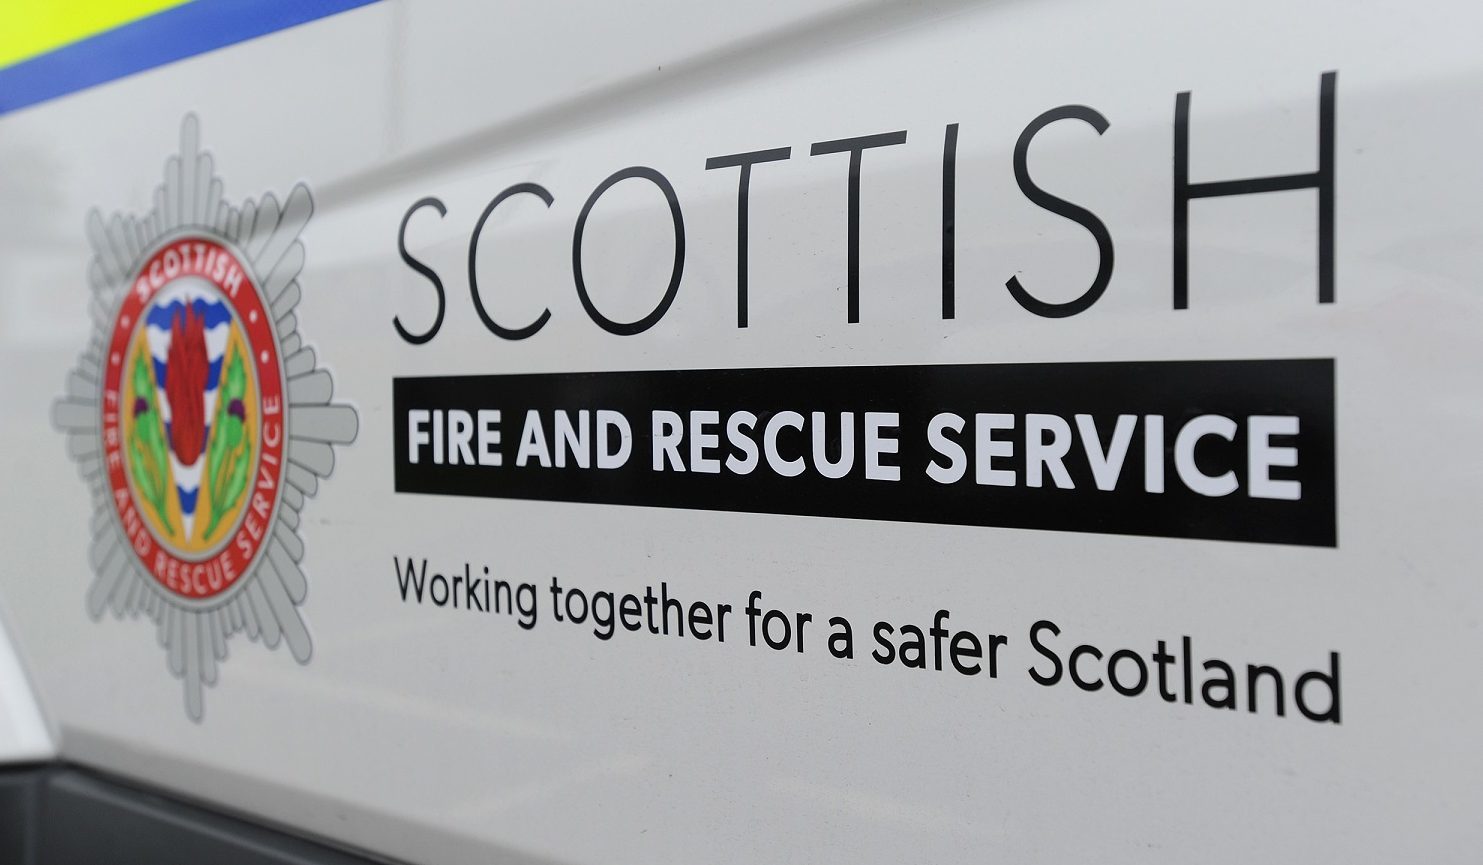 Firefighters from St Andrews and Cupar were called to attend.